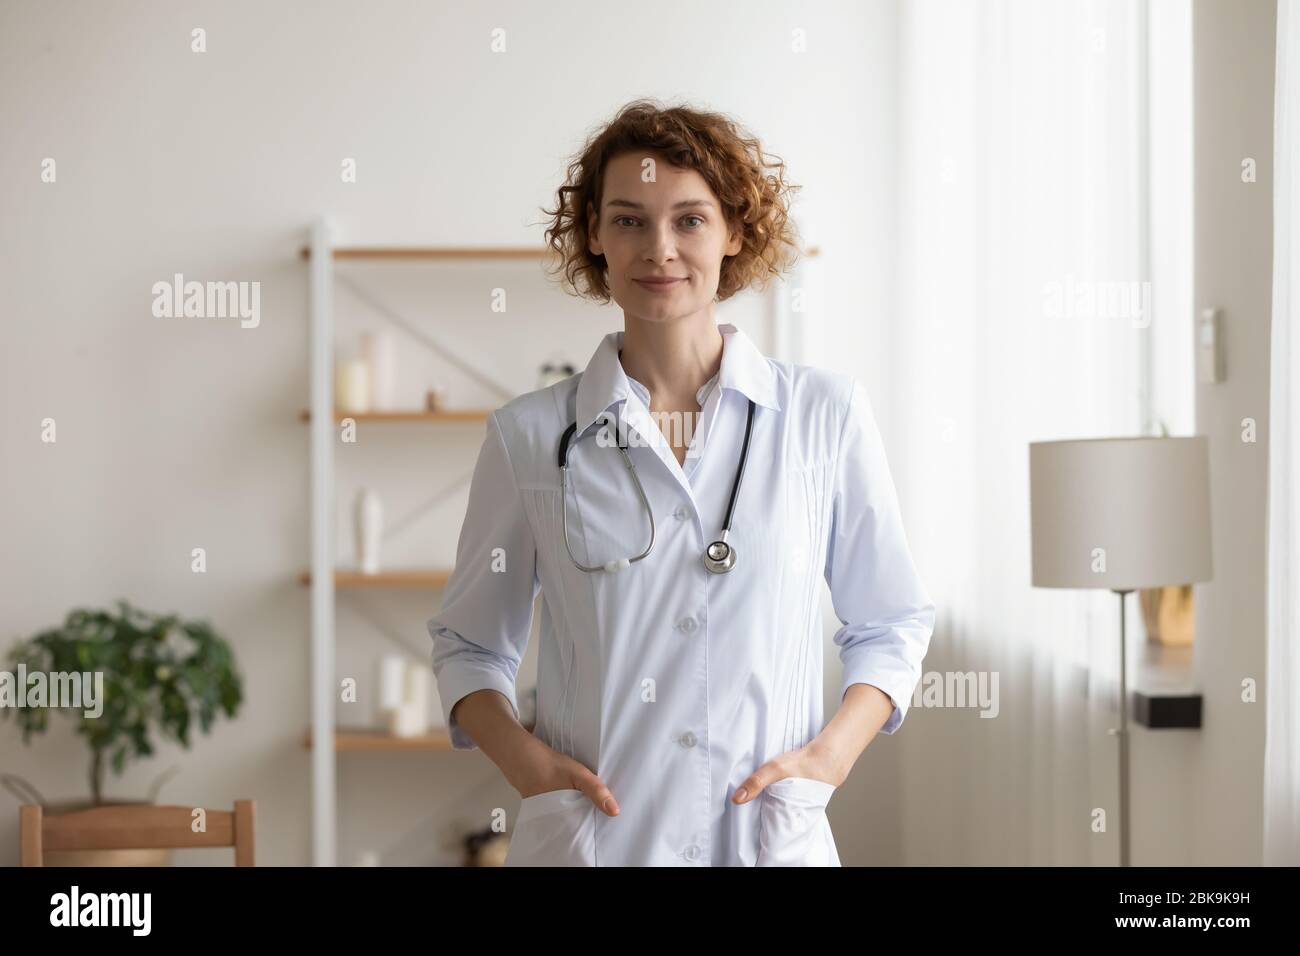 Confident young female physician standing in medical office interior, portrait Stock Photo